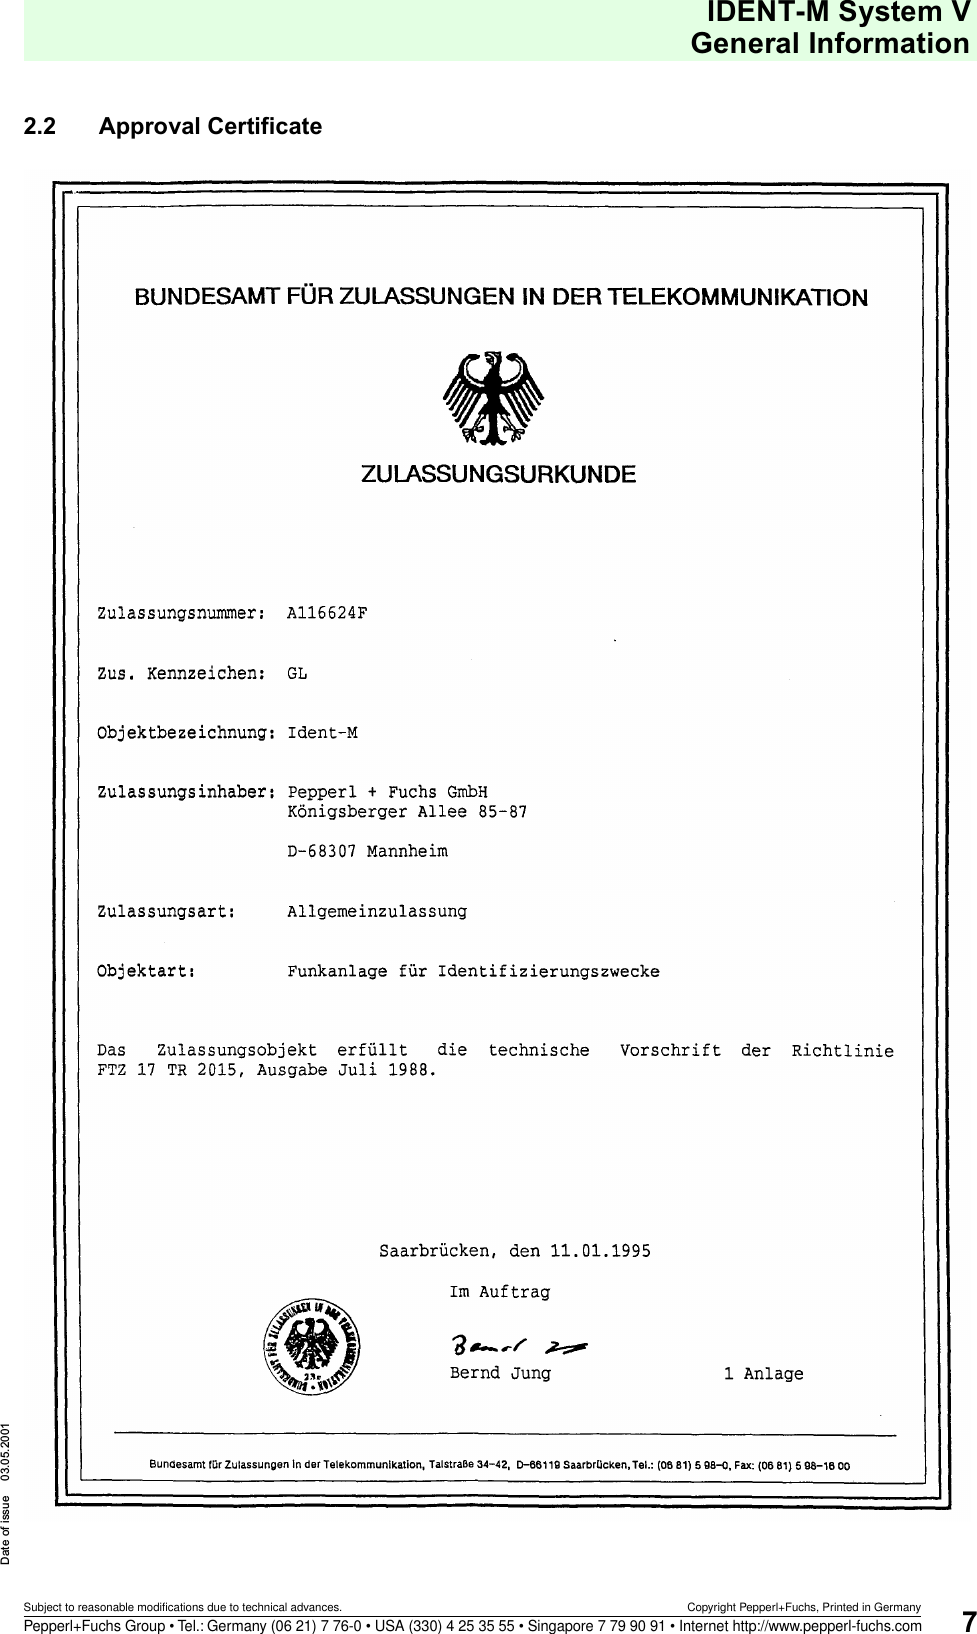 IDENT-M System VGeneral InformationDate of issue 03.05.20017Subject to reasonable modifications due to technical advances. Copyright Pepperl+Fuchs, Printed in GermanyPepperl+Fuchs Group • Tel.: Germany (06 21) 7 76-0 • USA (330) 4 25 35 55 • Singapore 7 79 90 91 • Internet http://www.pepperl-fuchs.com2.2 Approval Certificate